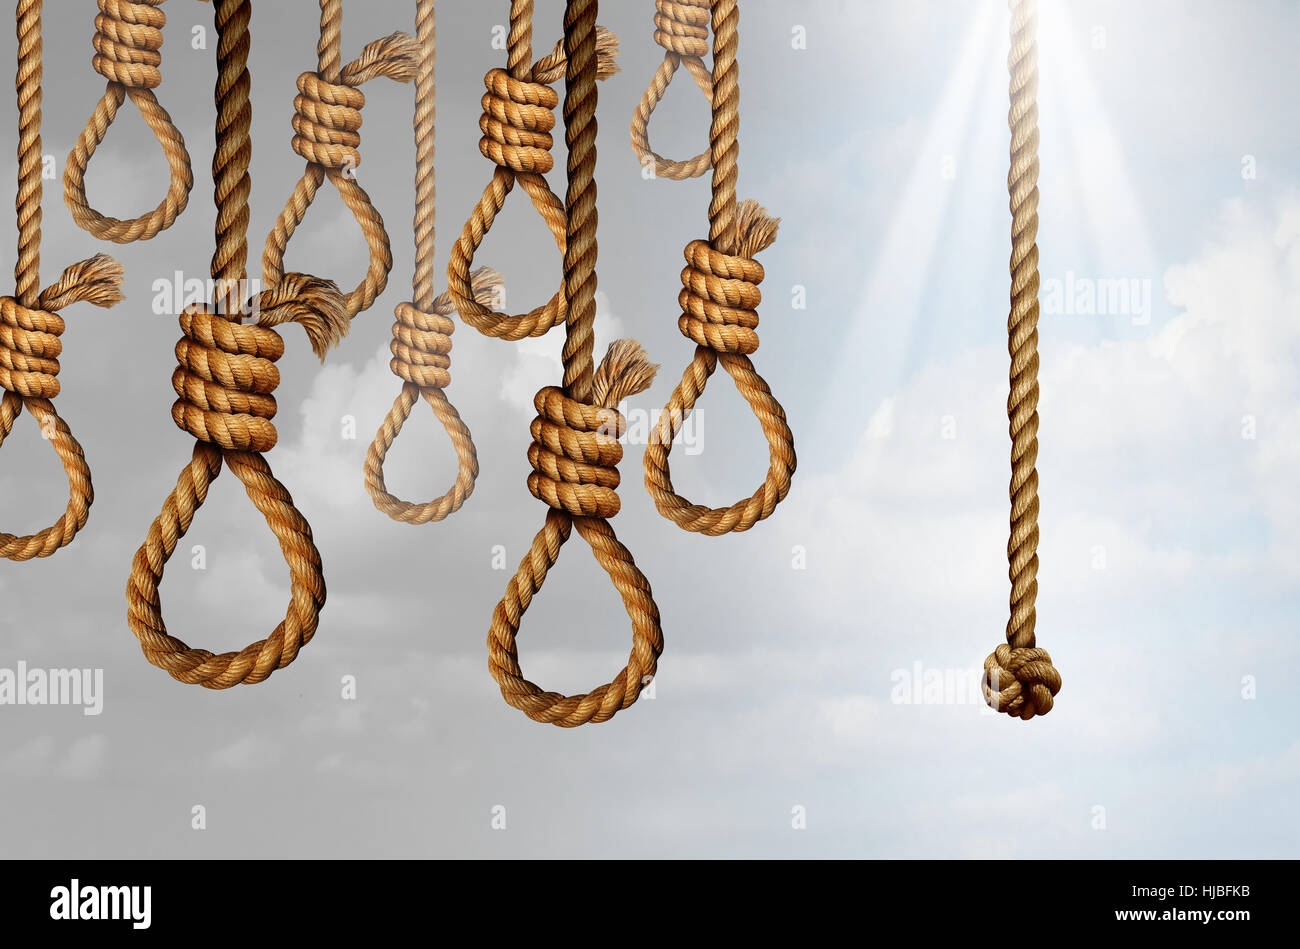 Despair and hope concept as a group of deadly hanging noose knots representing desperate suicidal psychological misery with one individual straight ro Stock Photo